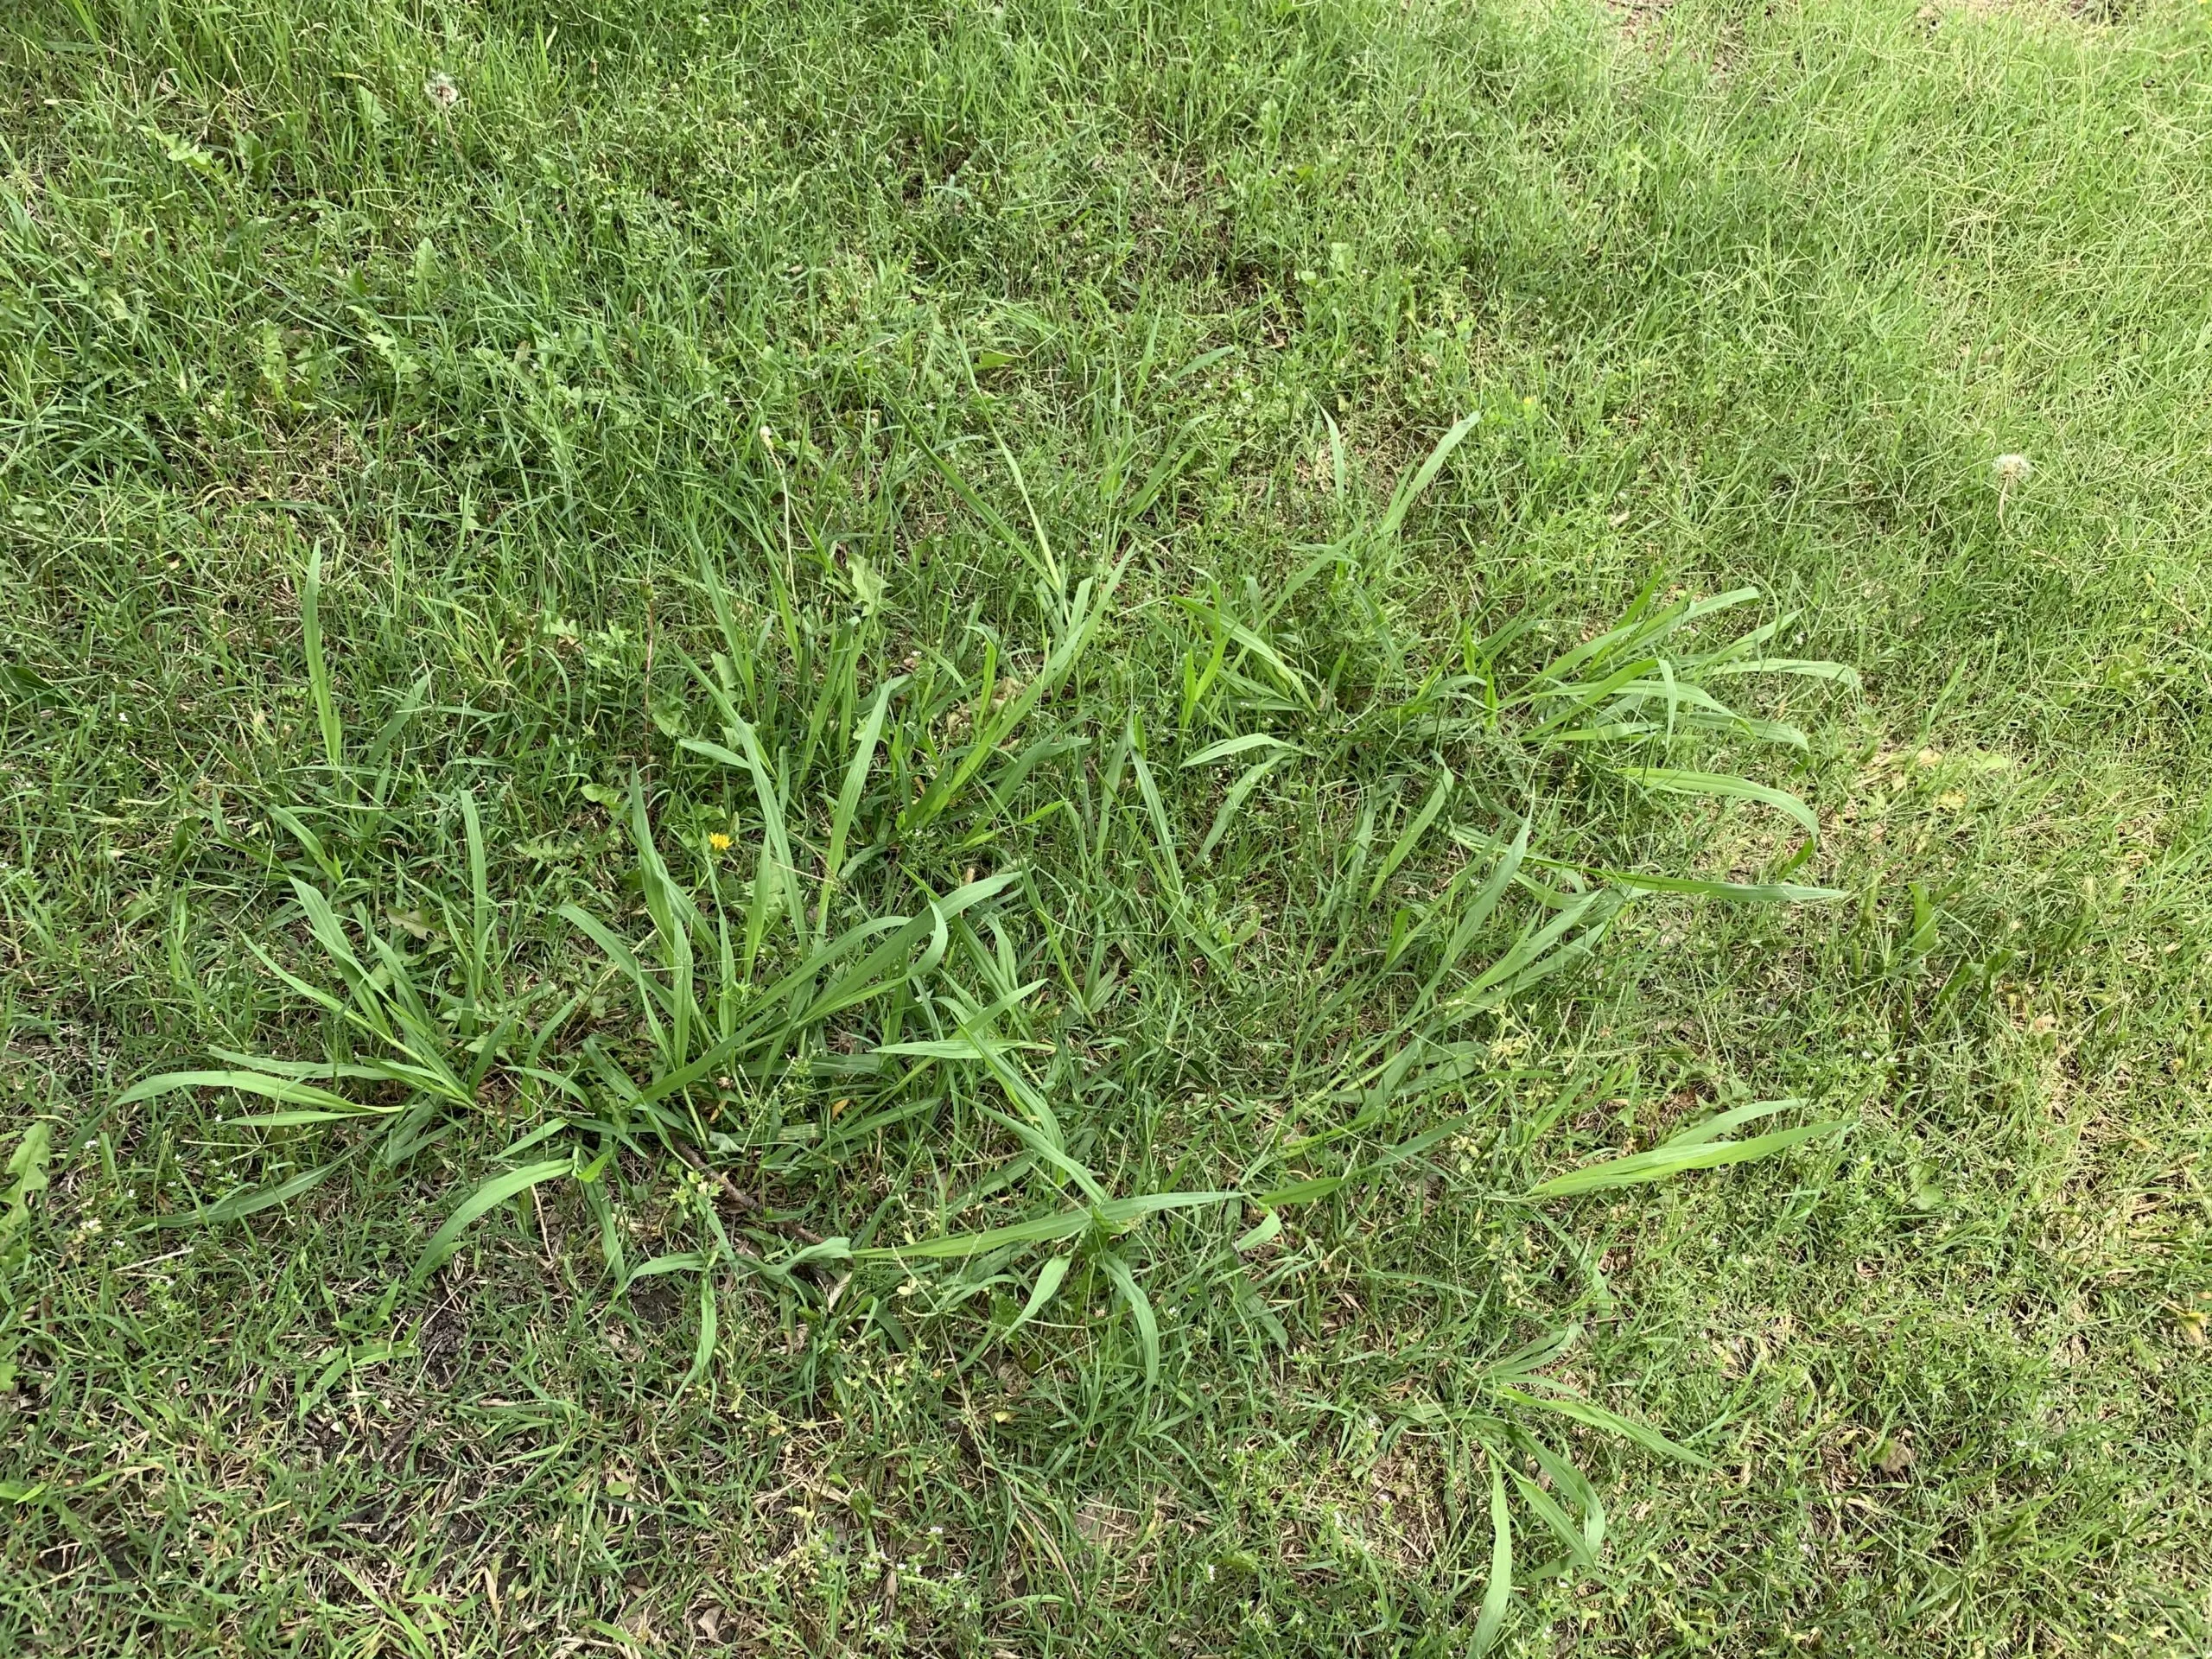 How to Combat Grassy Summer Weeds in North Texas